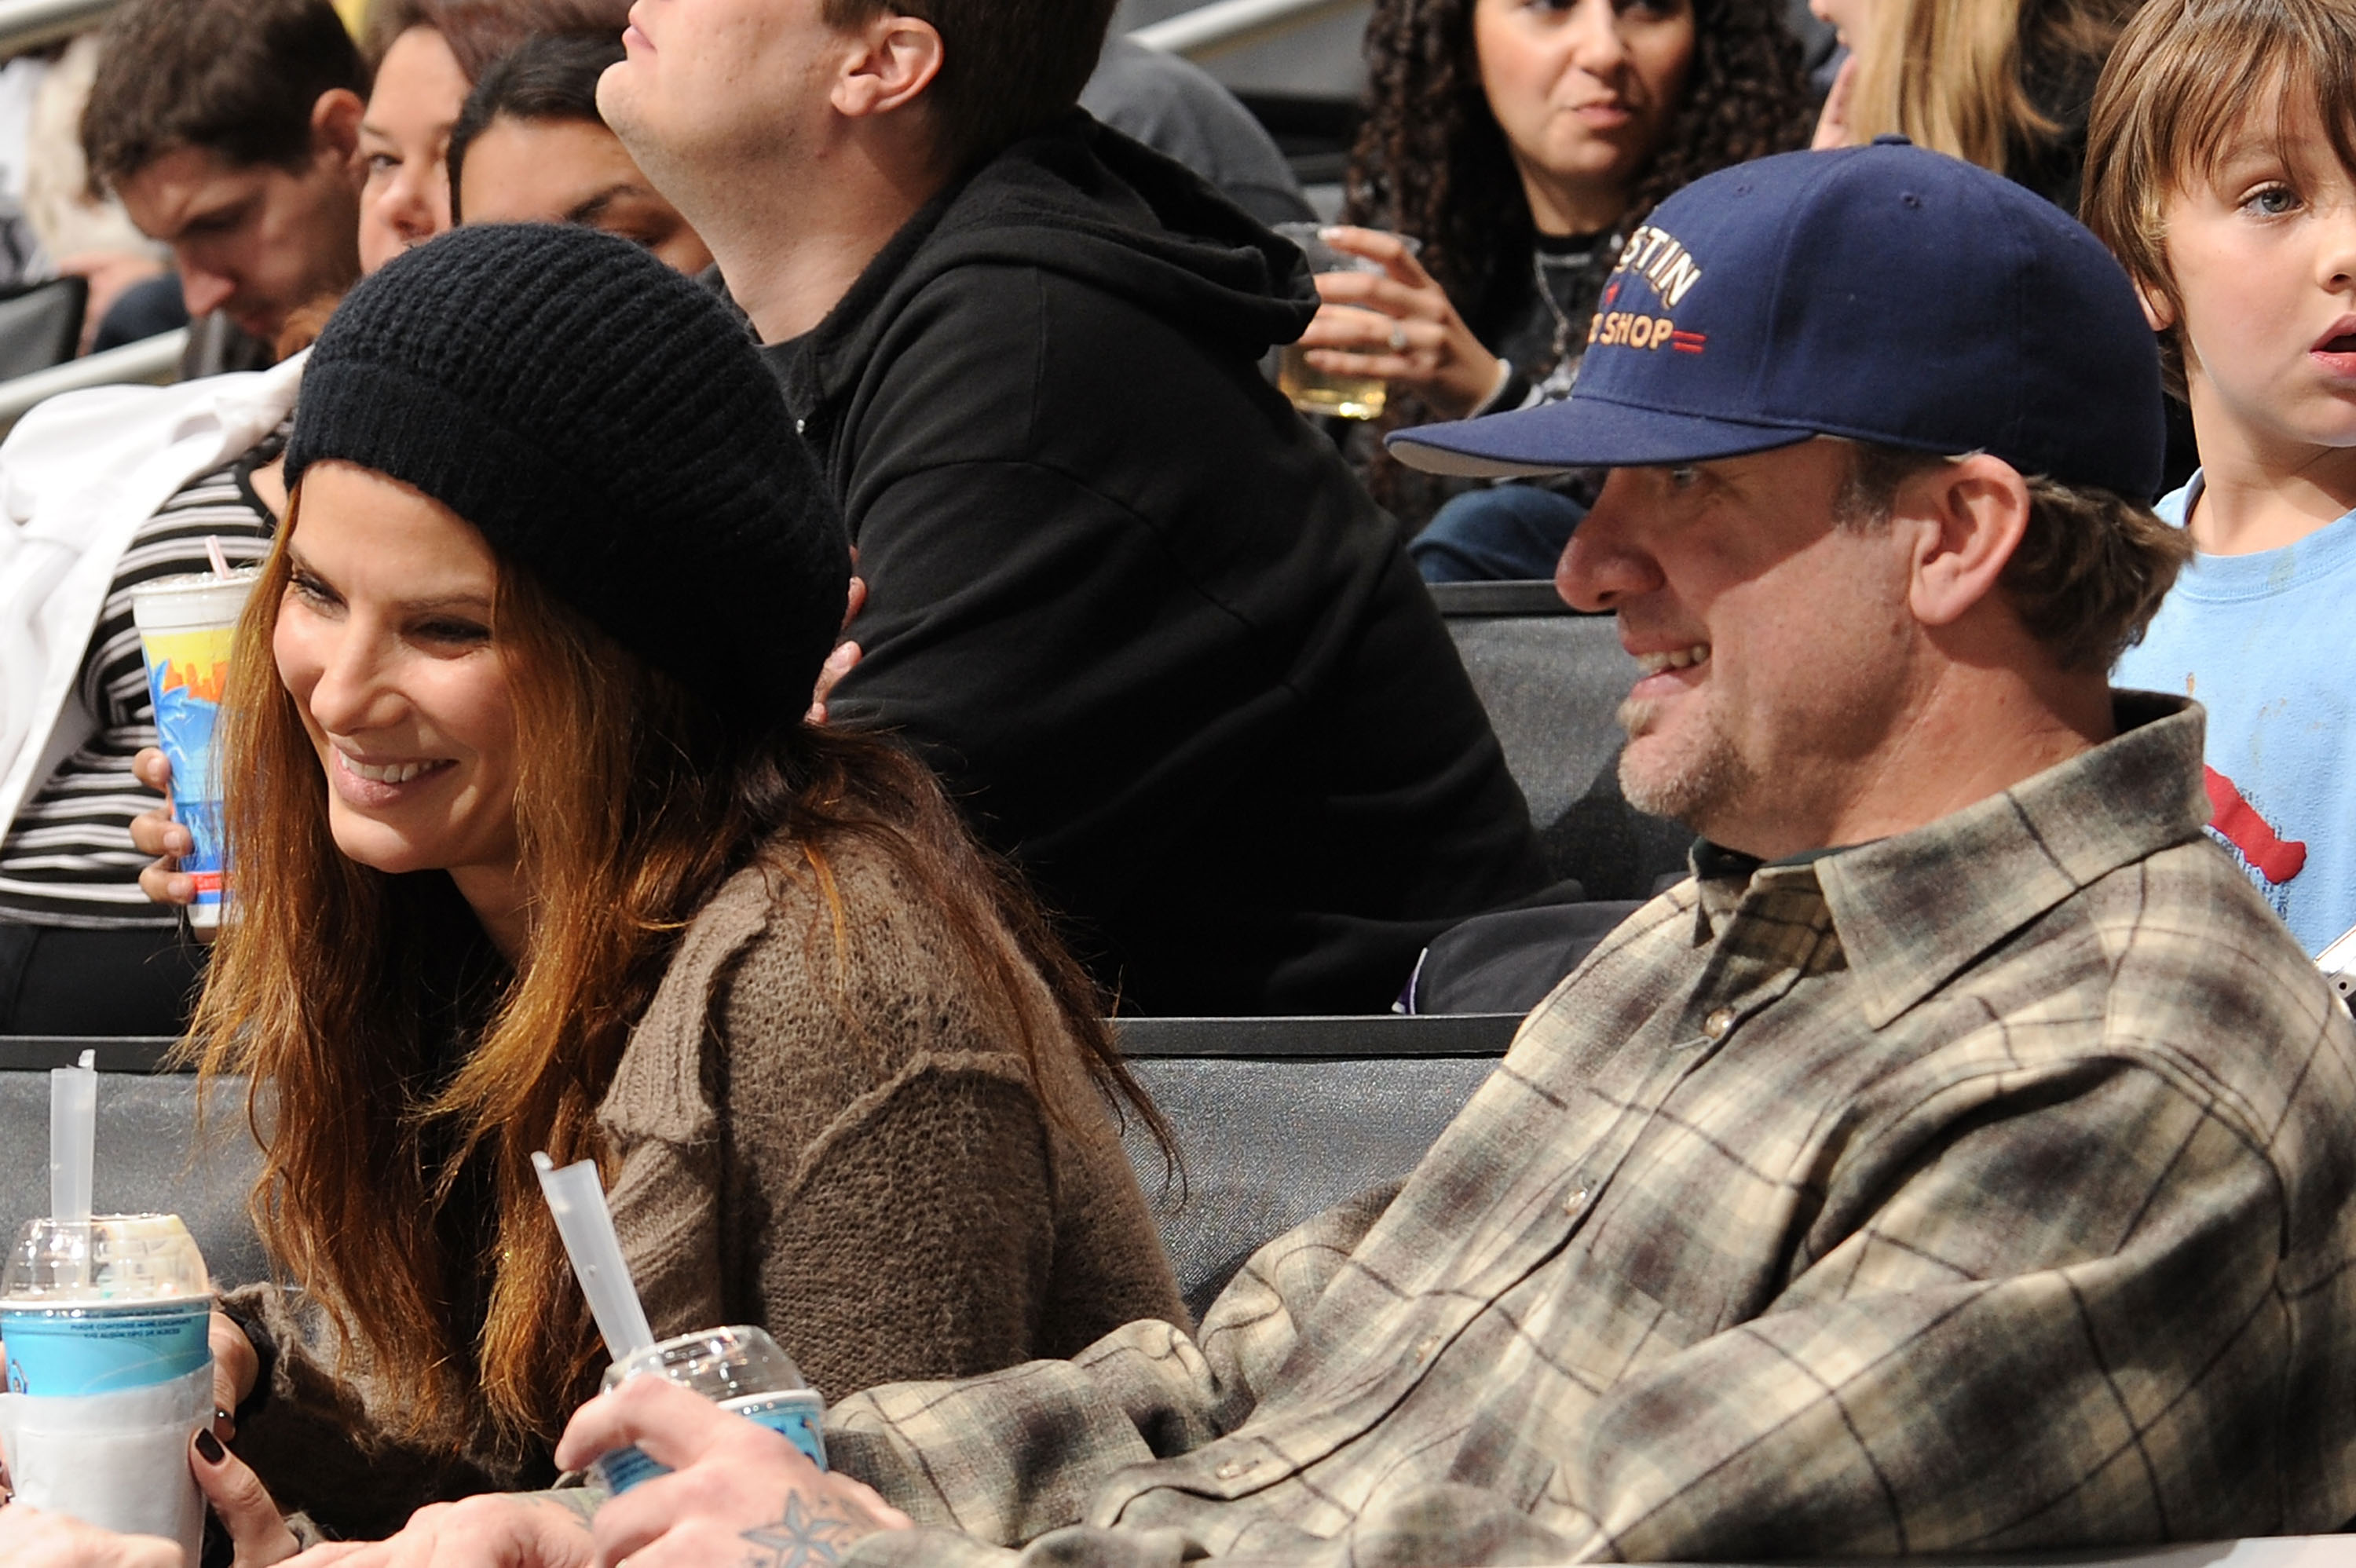 Sandra Bullock and Jesse James at a Dallas Stars vs Los Angeles Kings game in Los Angeles, California on November 11, 2008 | Source: Getty Images